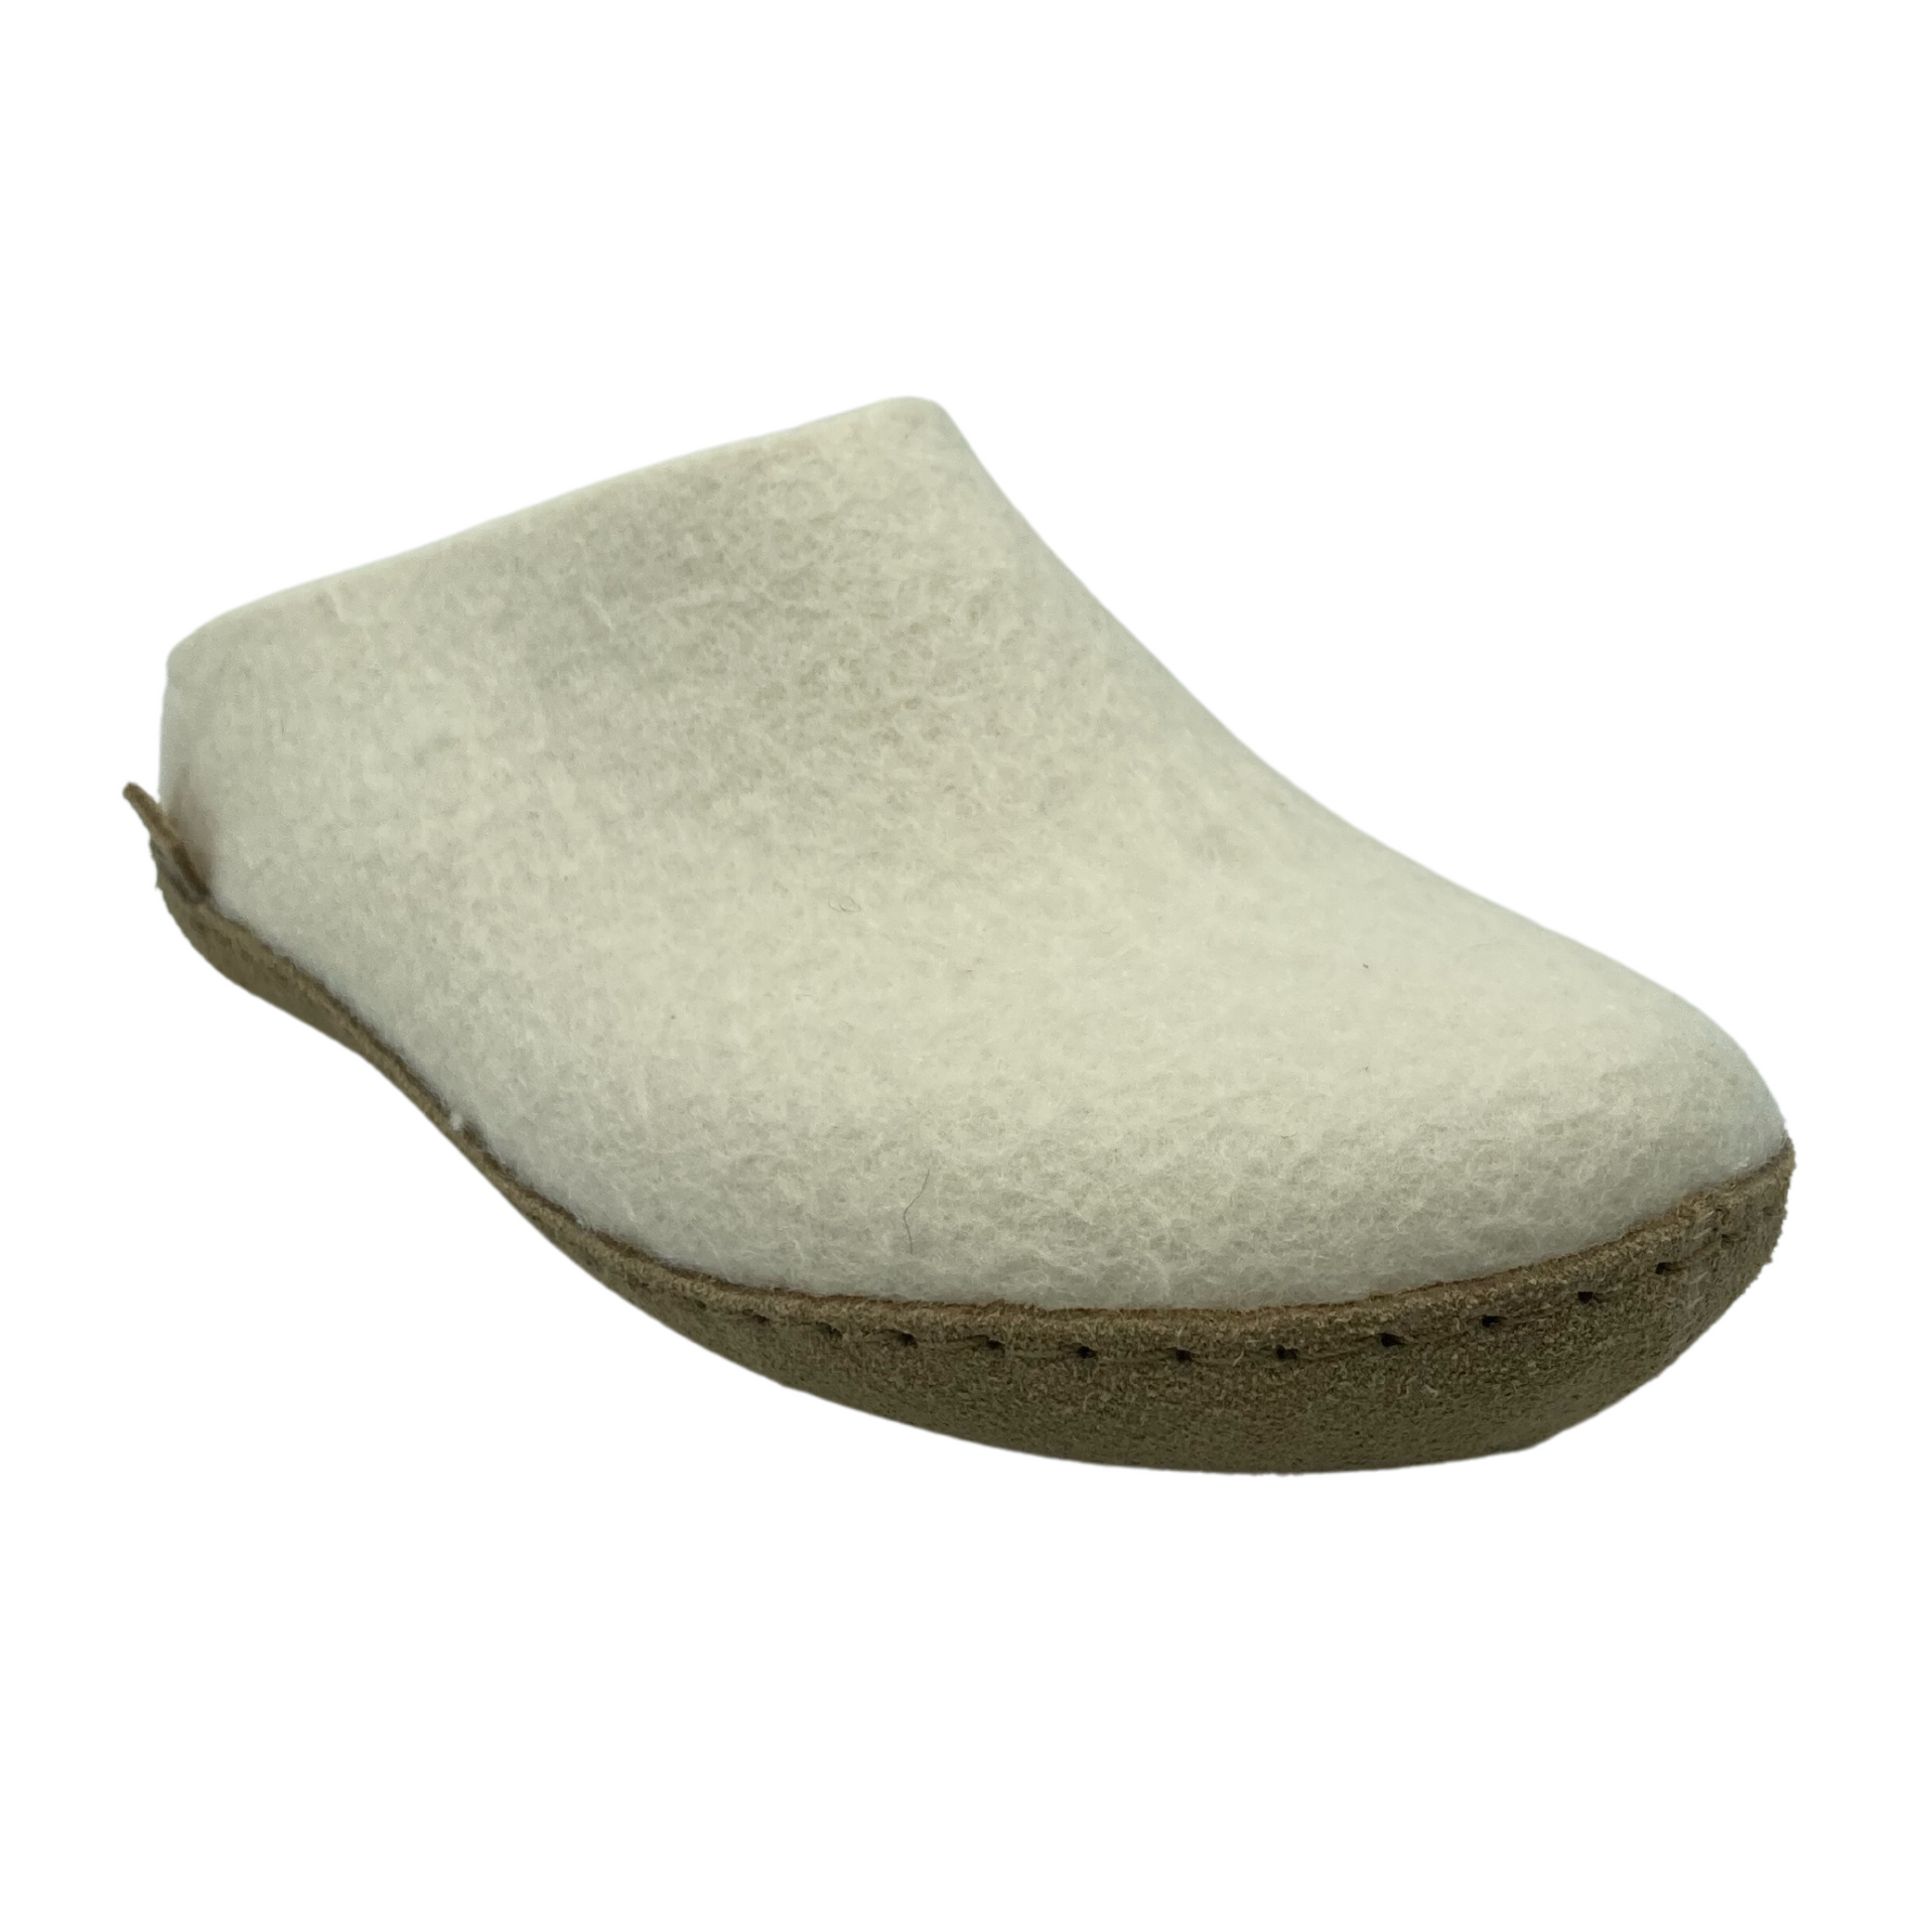 45 degree angled view of white felted slip-on shoe with leather sole